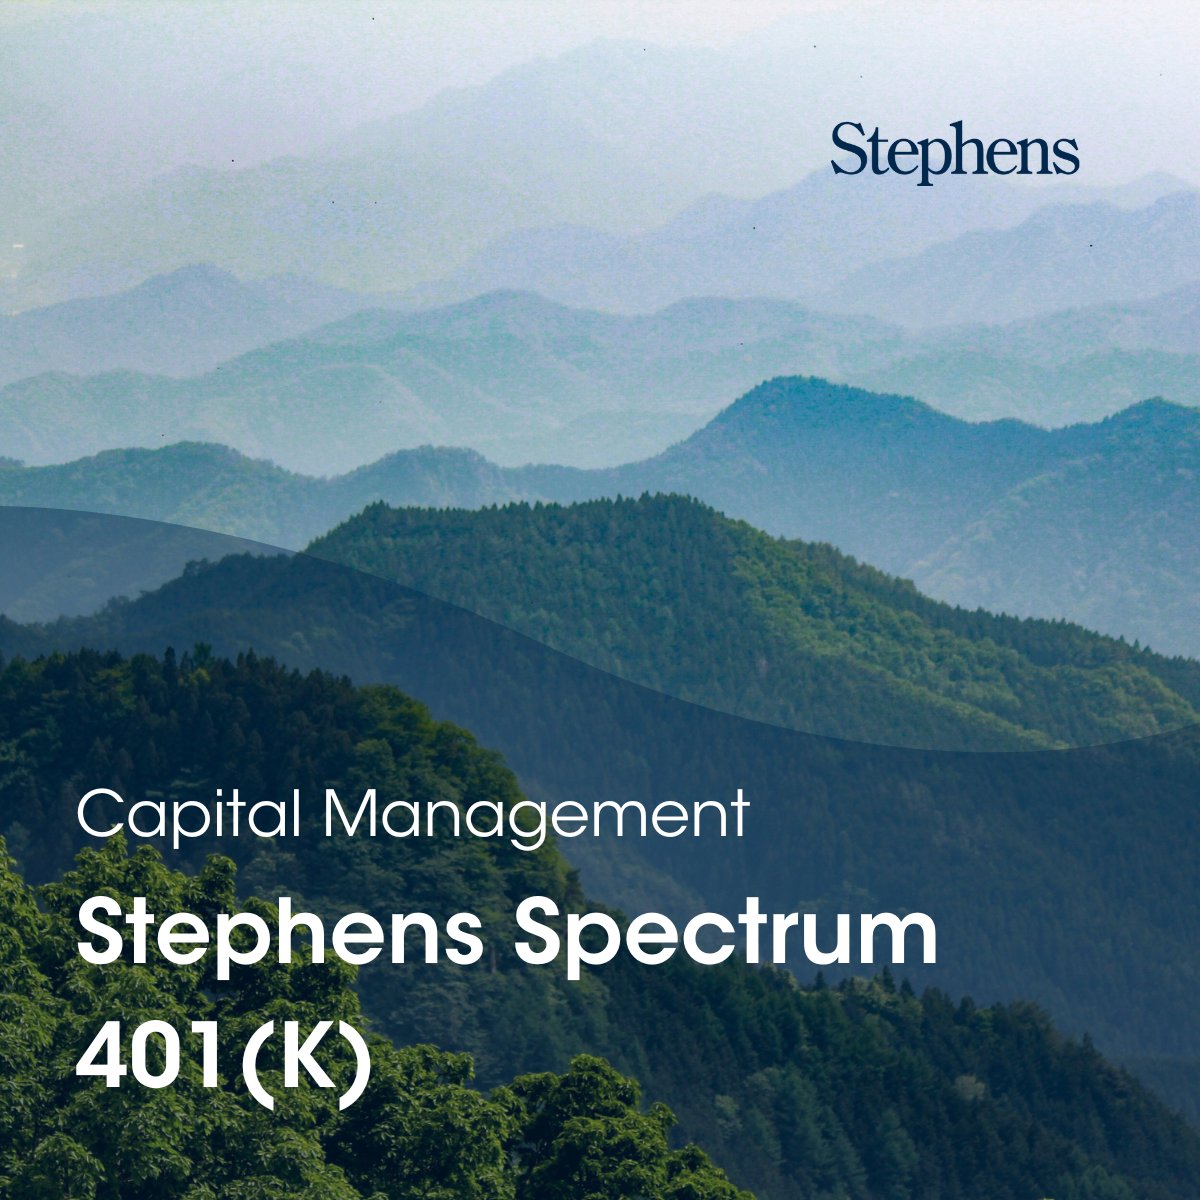 Today is National 401K Day! Check out how the Stephens Spectrum aligns client goals with retirement strategies. stephens.com/capital-manage…